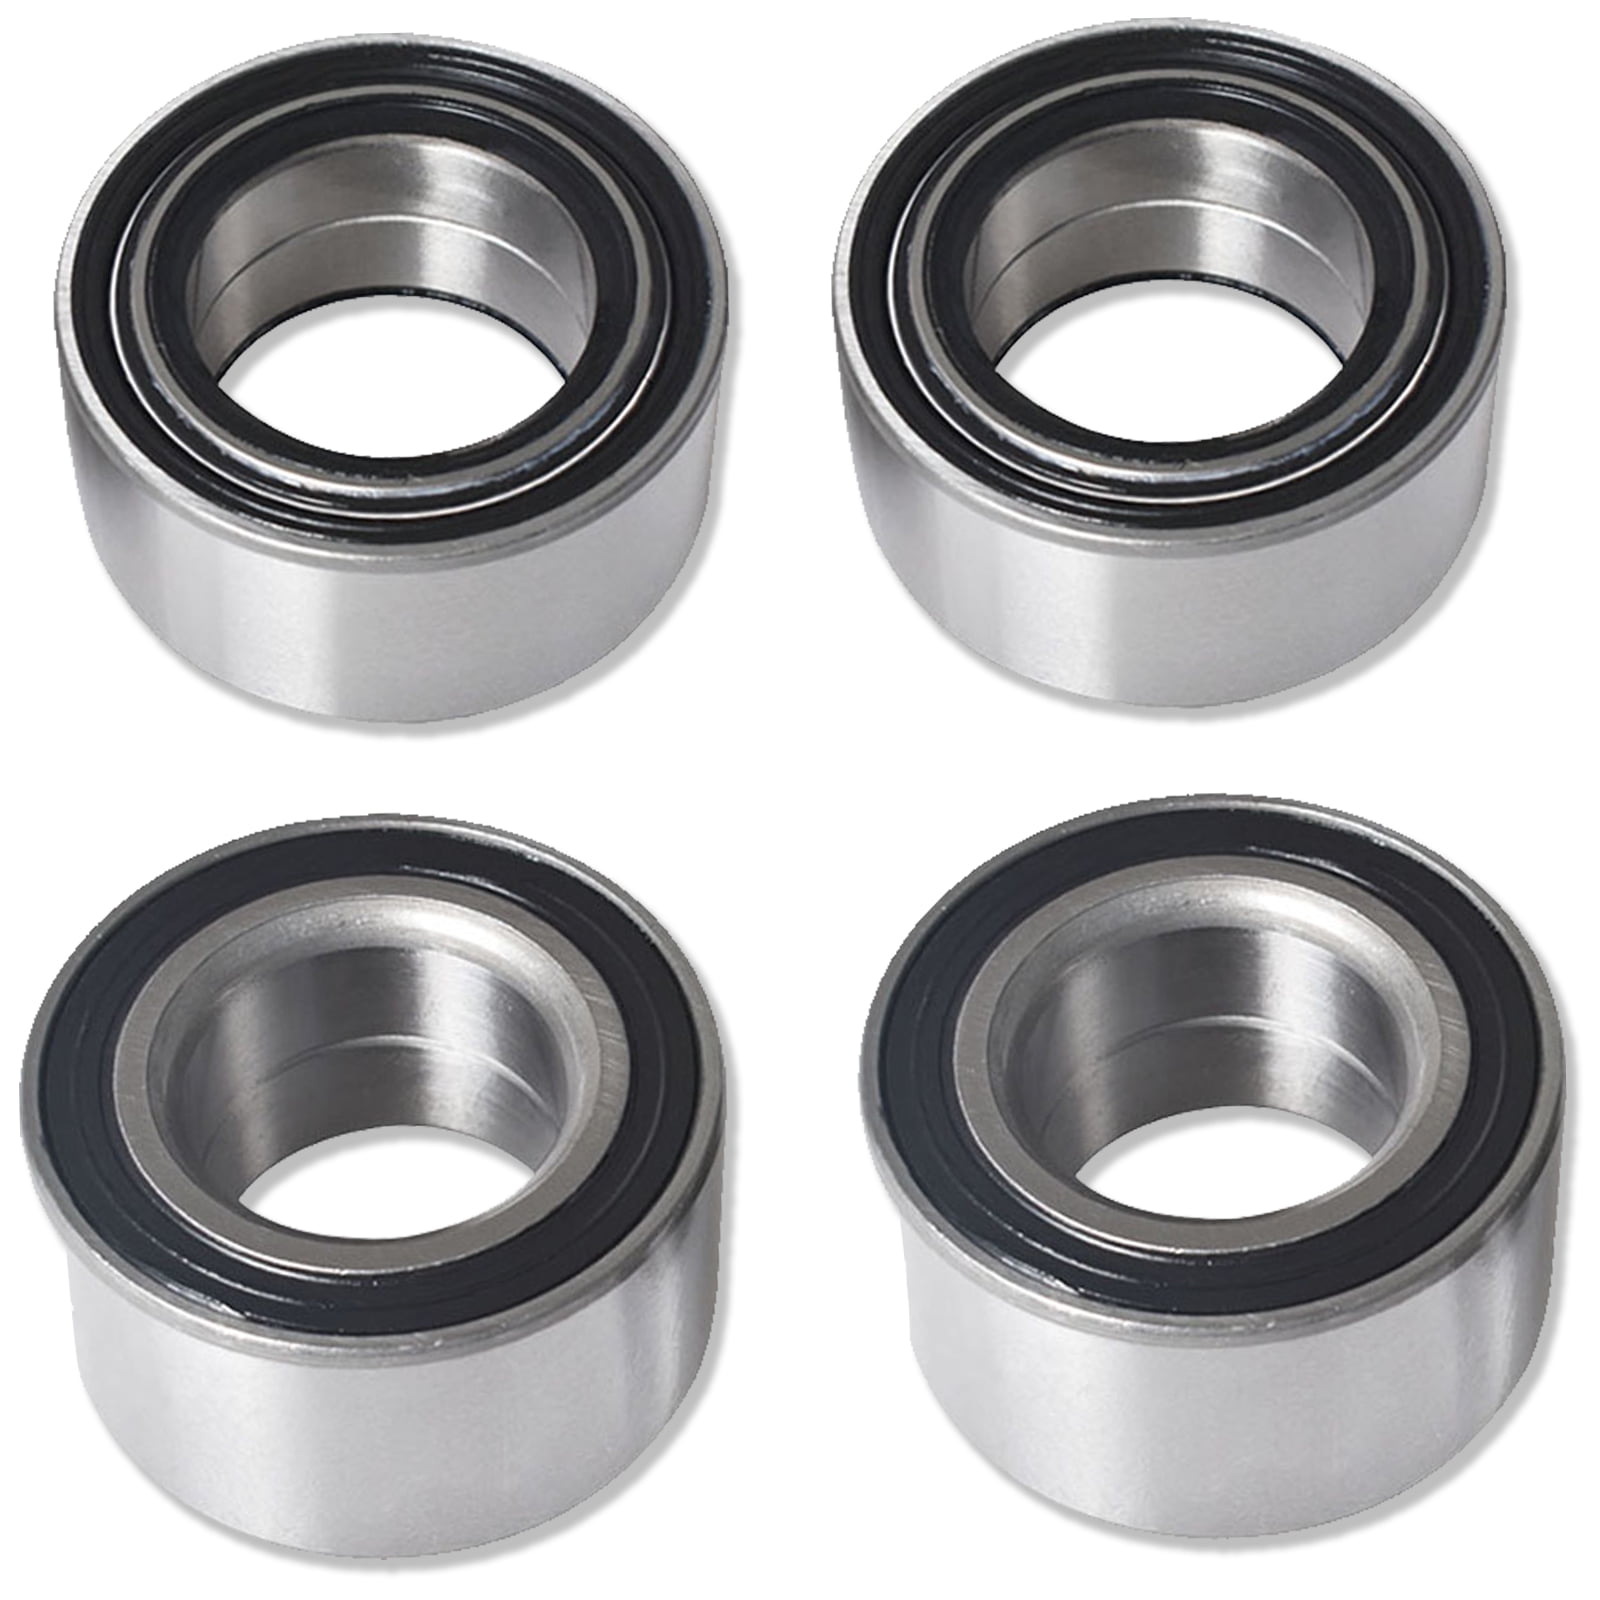 3514699 Front Wheel Bearings For Polaris RZR 800 S 4 2010-2014 3514699 qty 2 